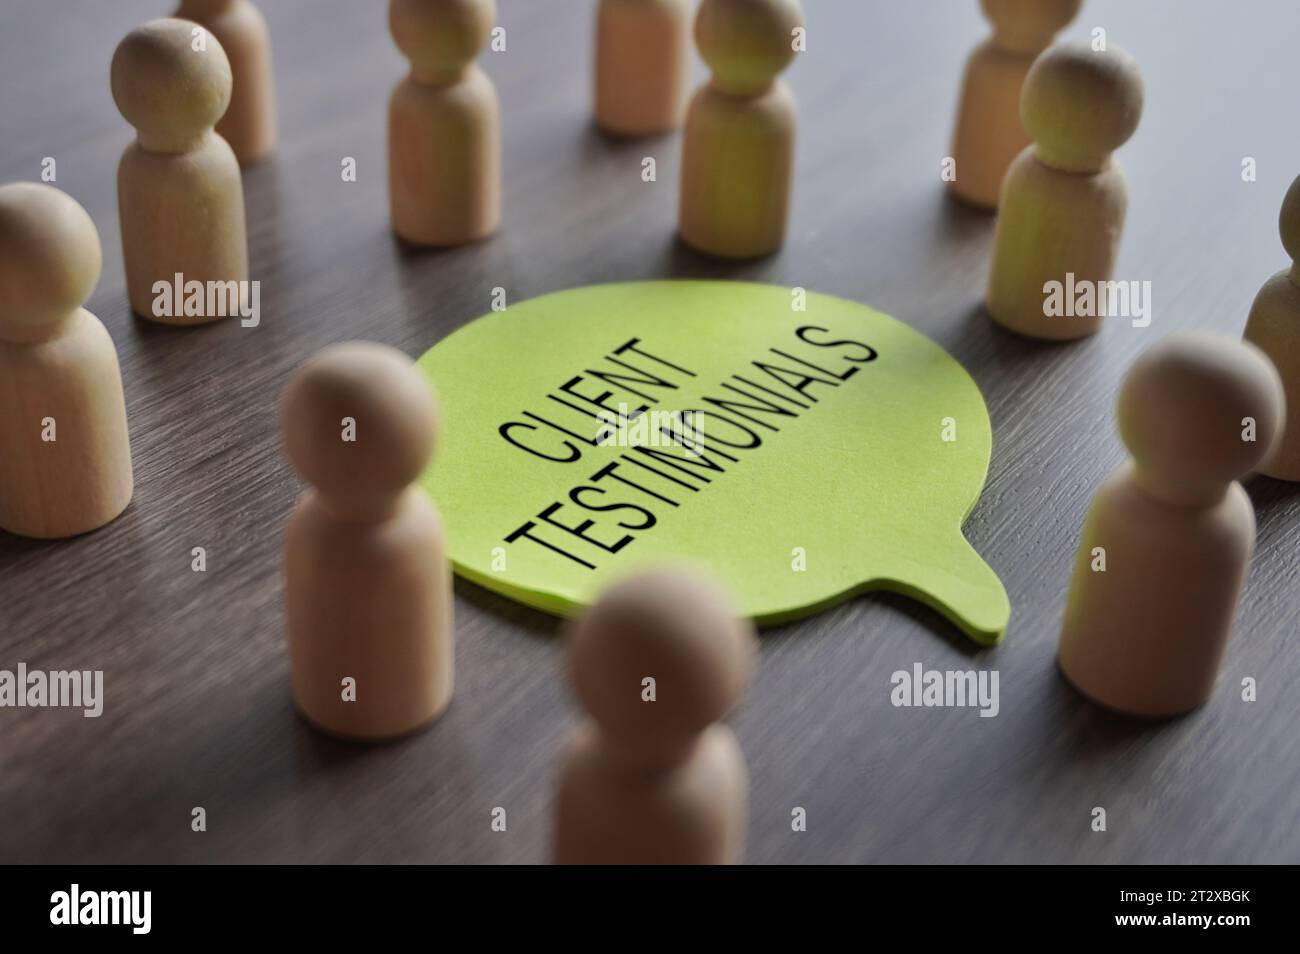 A group of wooden figurines surrounding a speech bubble with text CLIENT TESTIMONIALS. Business, feedback concept Stock Photo